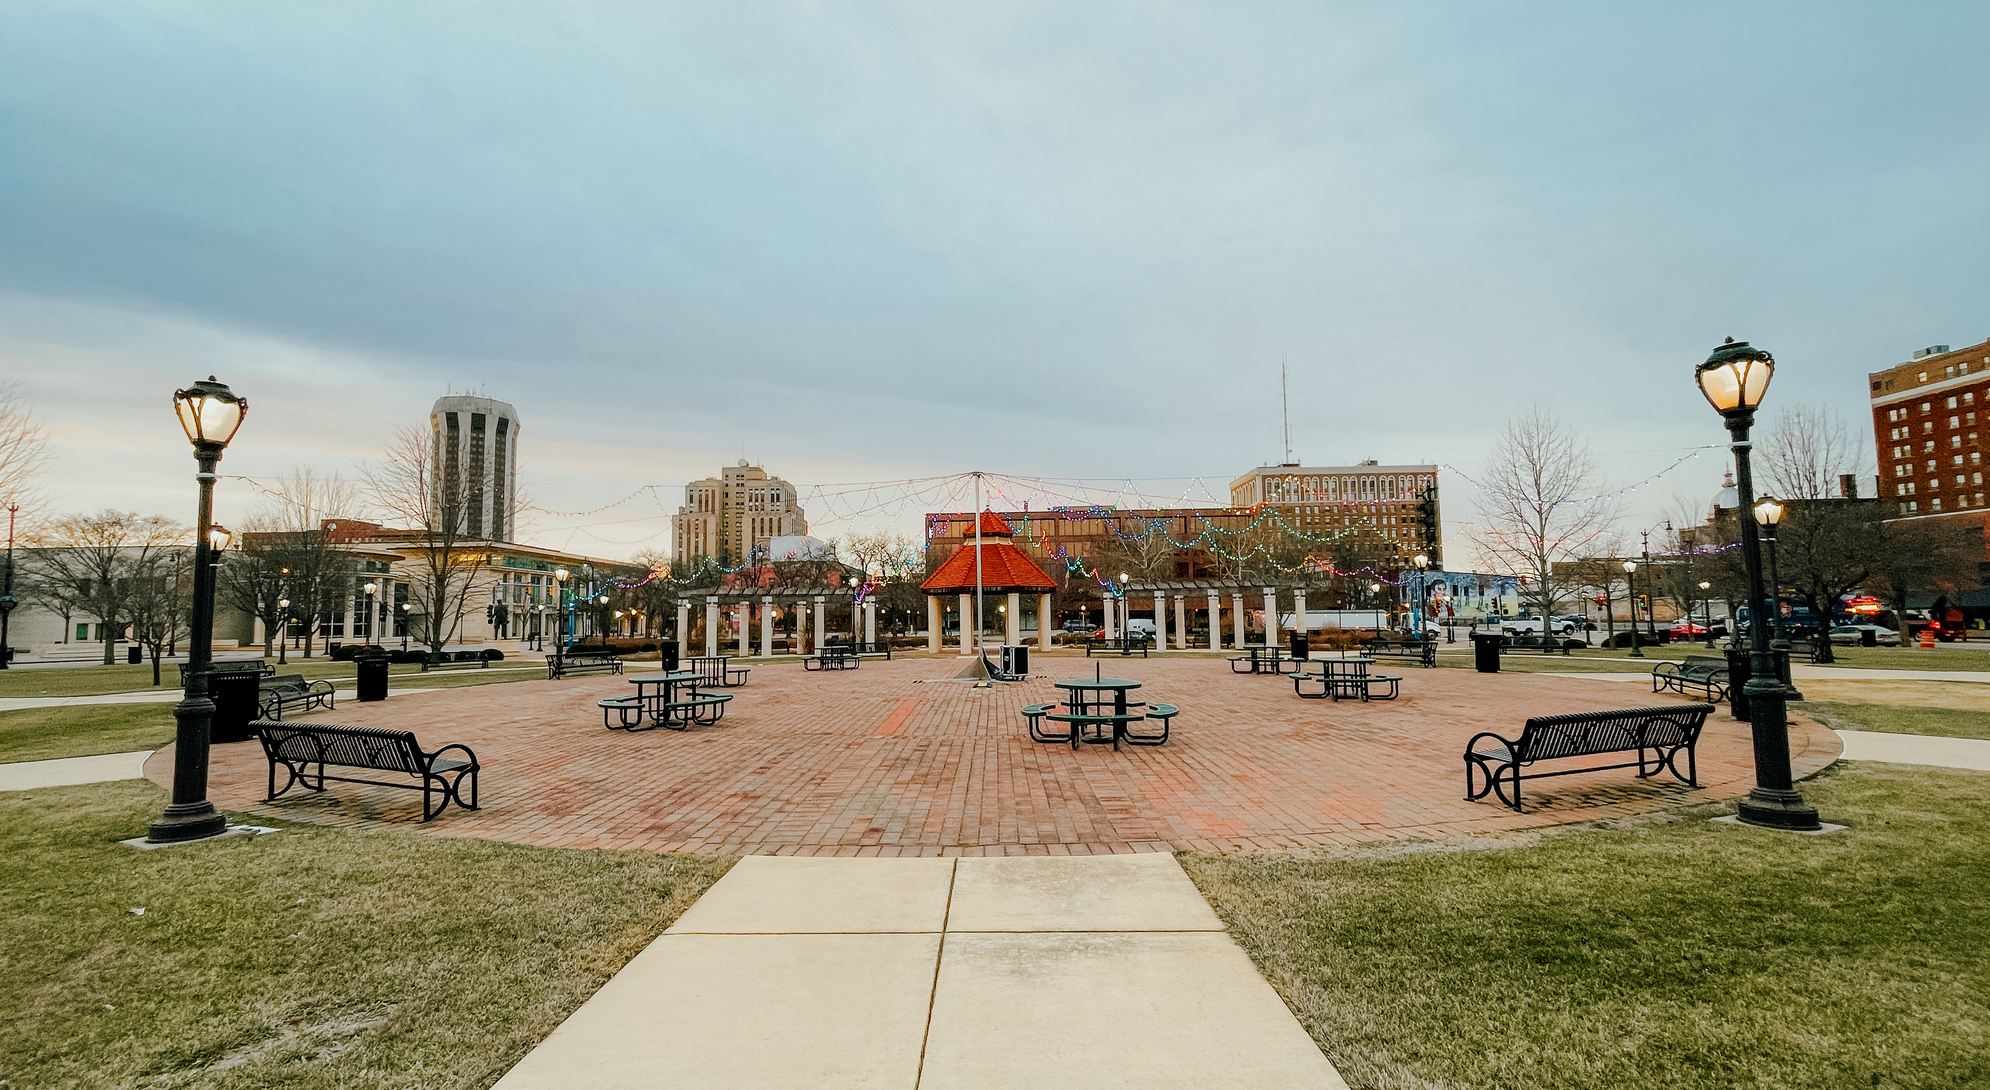 Looking out over the historic district Union Square Park in Springfield, Illinois. Charming park benches and vintage lamps in winter just after sunrise.